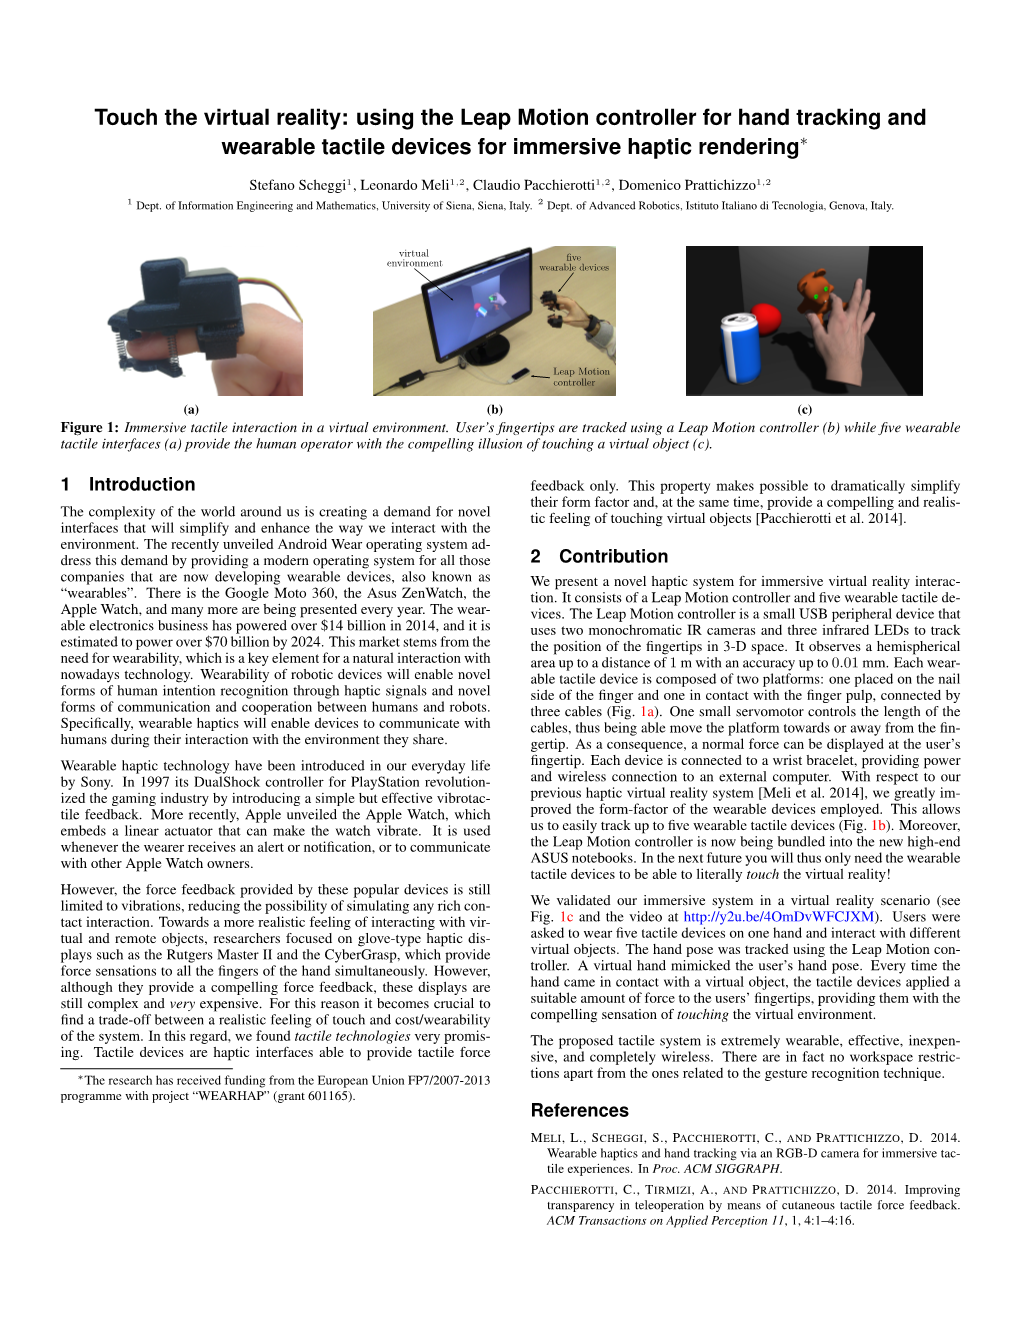 Using the Leap Motion Controller for Hand Tracking and Wearable Tactile Devices for Immersive Haptic Rendering∗